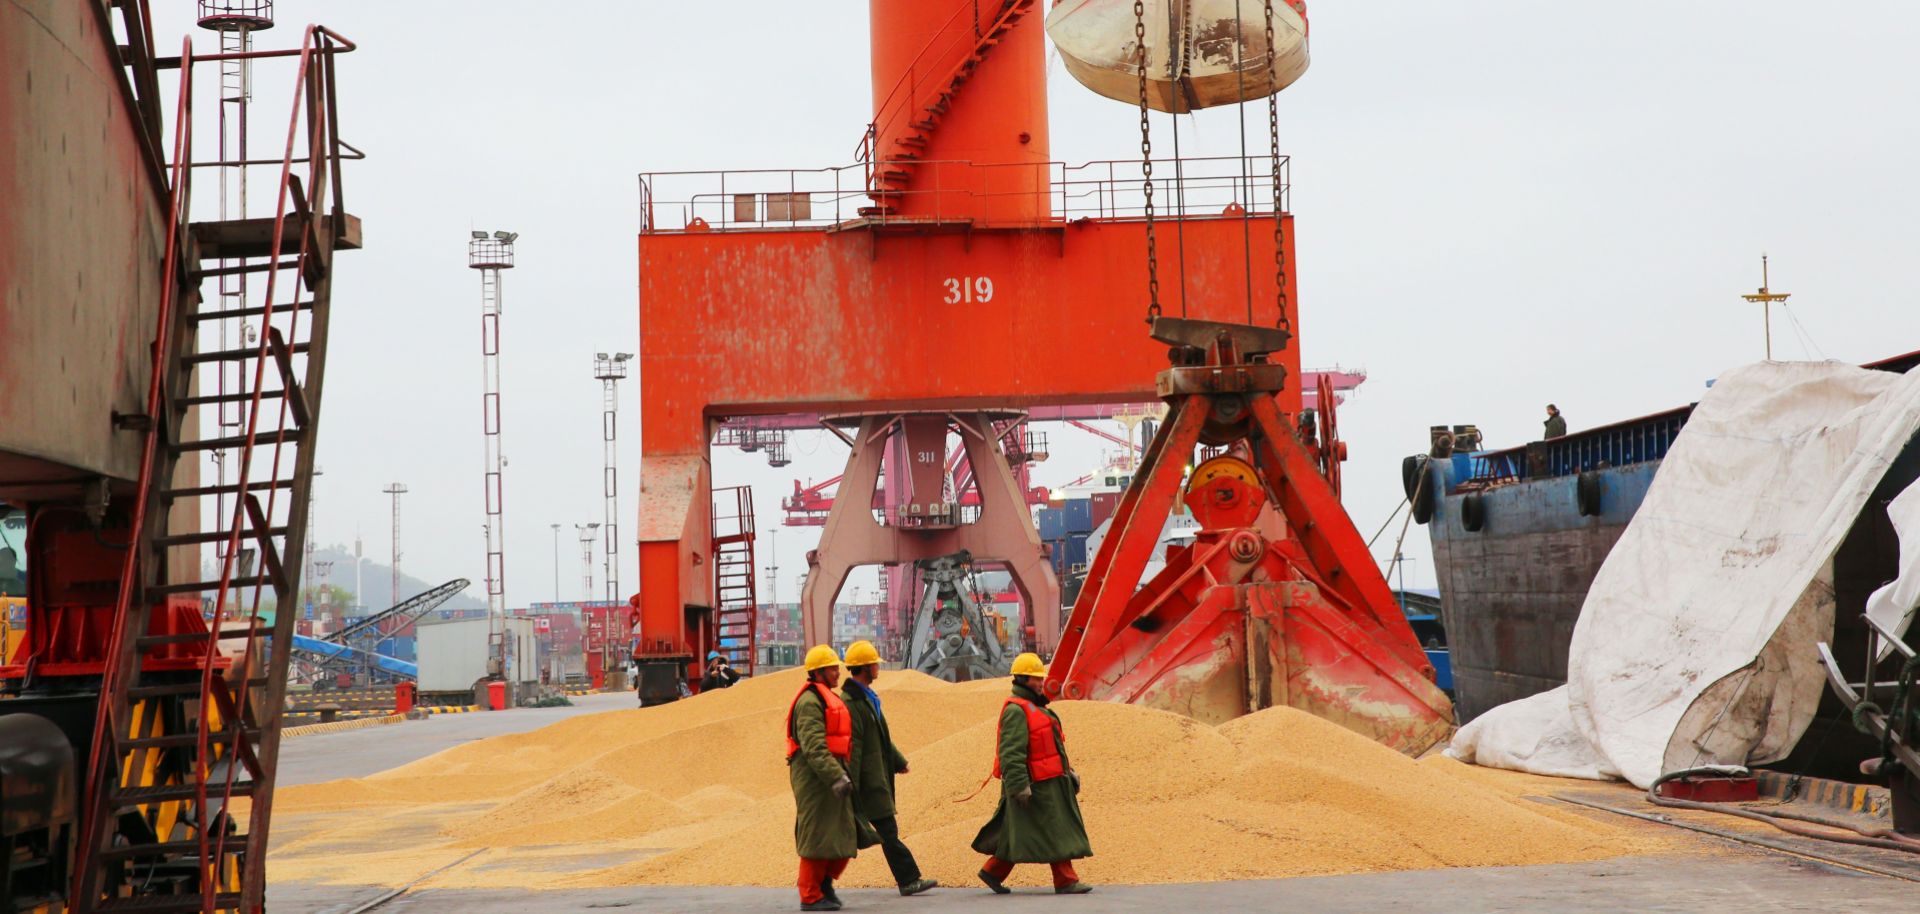 Chinese workers walk past imported soybeans at a port in Nantong, Jiangsu province, on April 4, 2018.